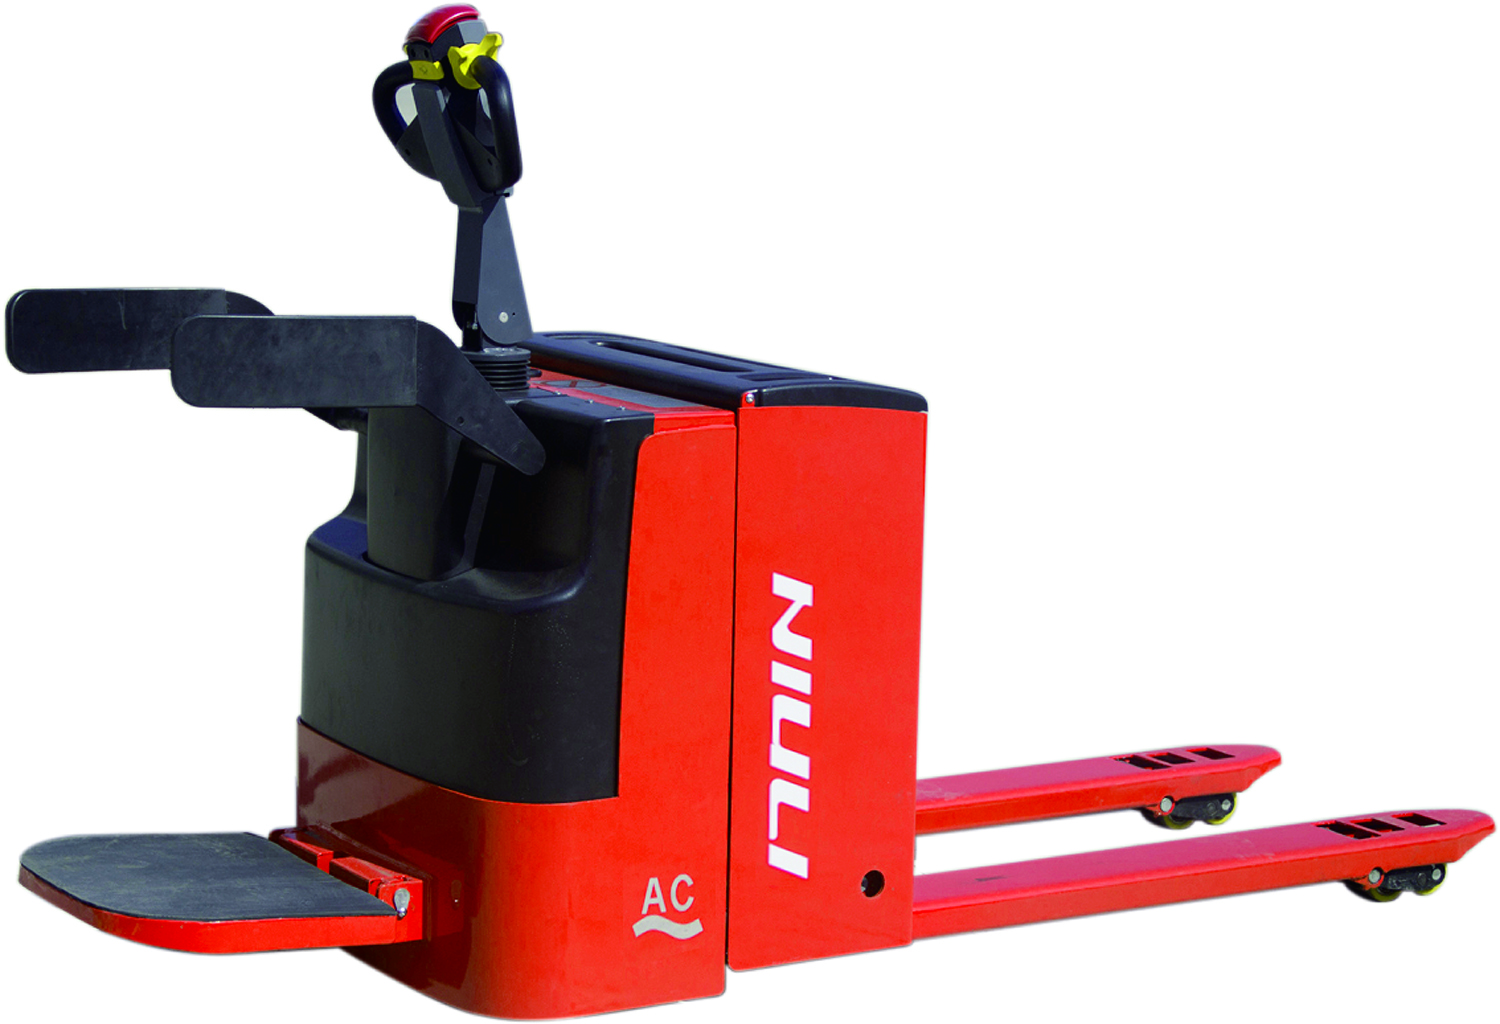 NIULI Full Battery Fork Lifter Electric Powered Pallet Truck